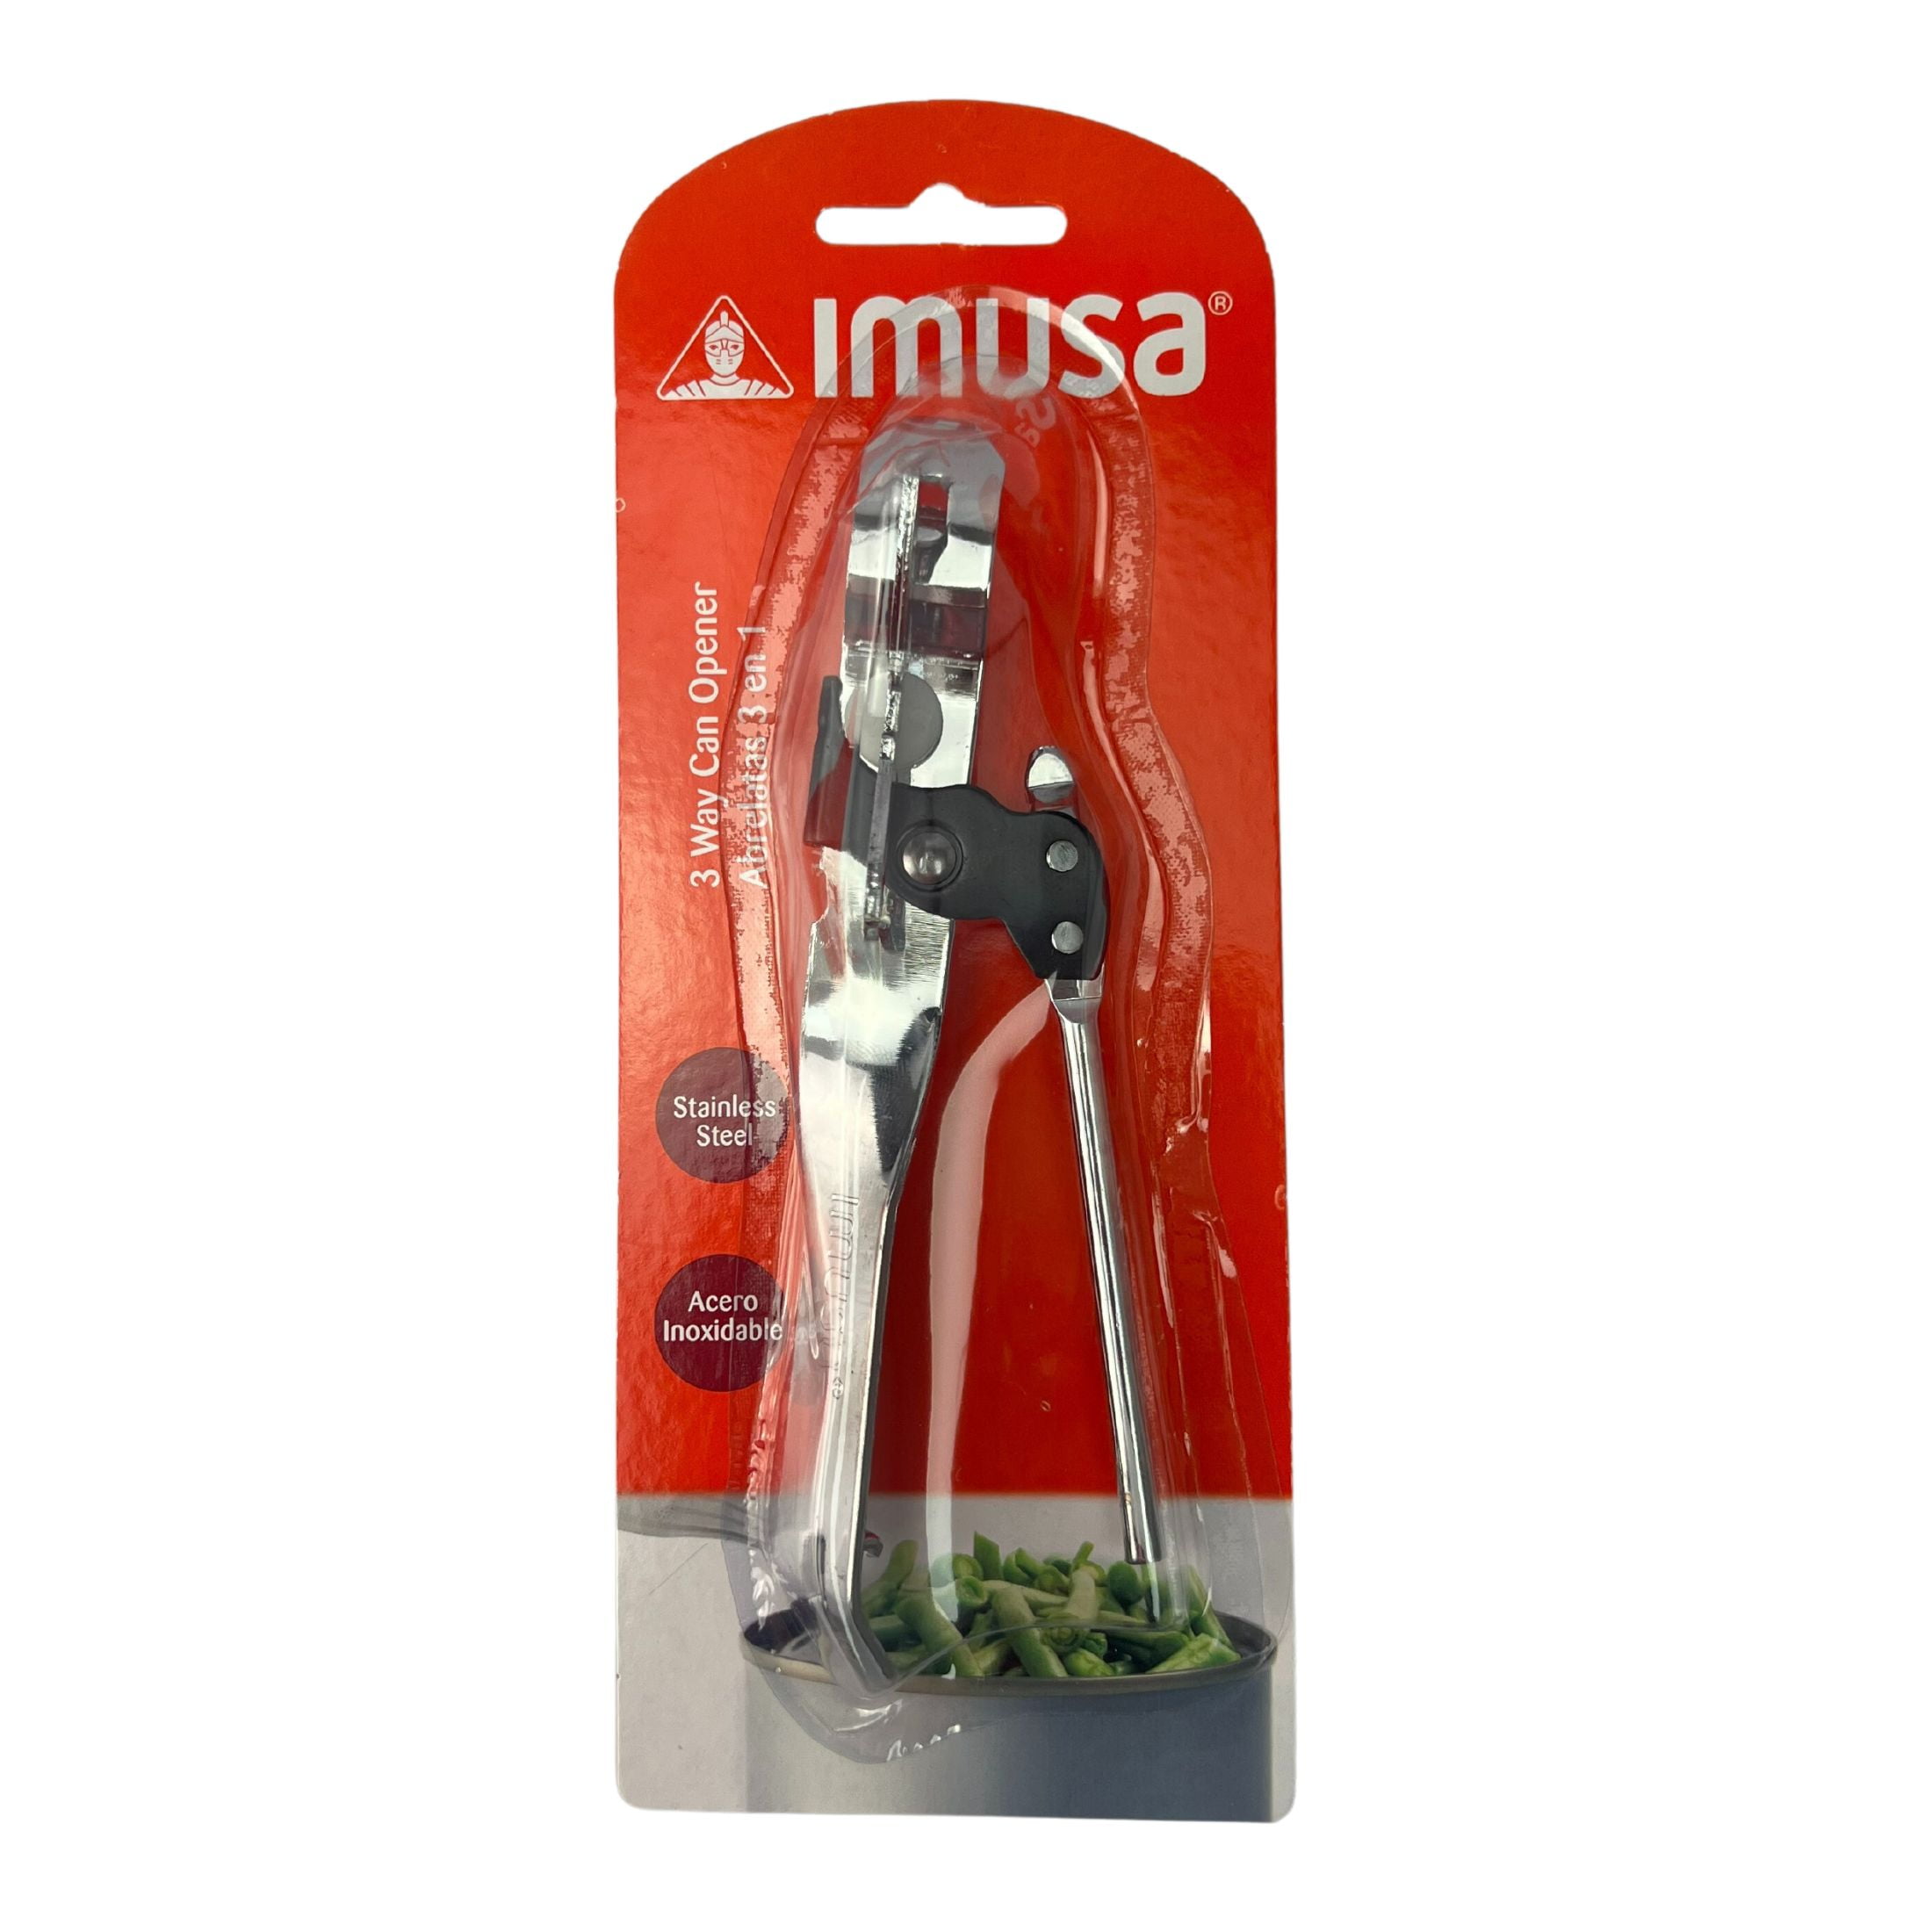 IMUSA USA Electric Can Opener with Bottle Opener and Knife Sharpener, Red  Small